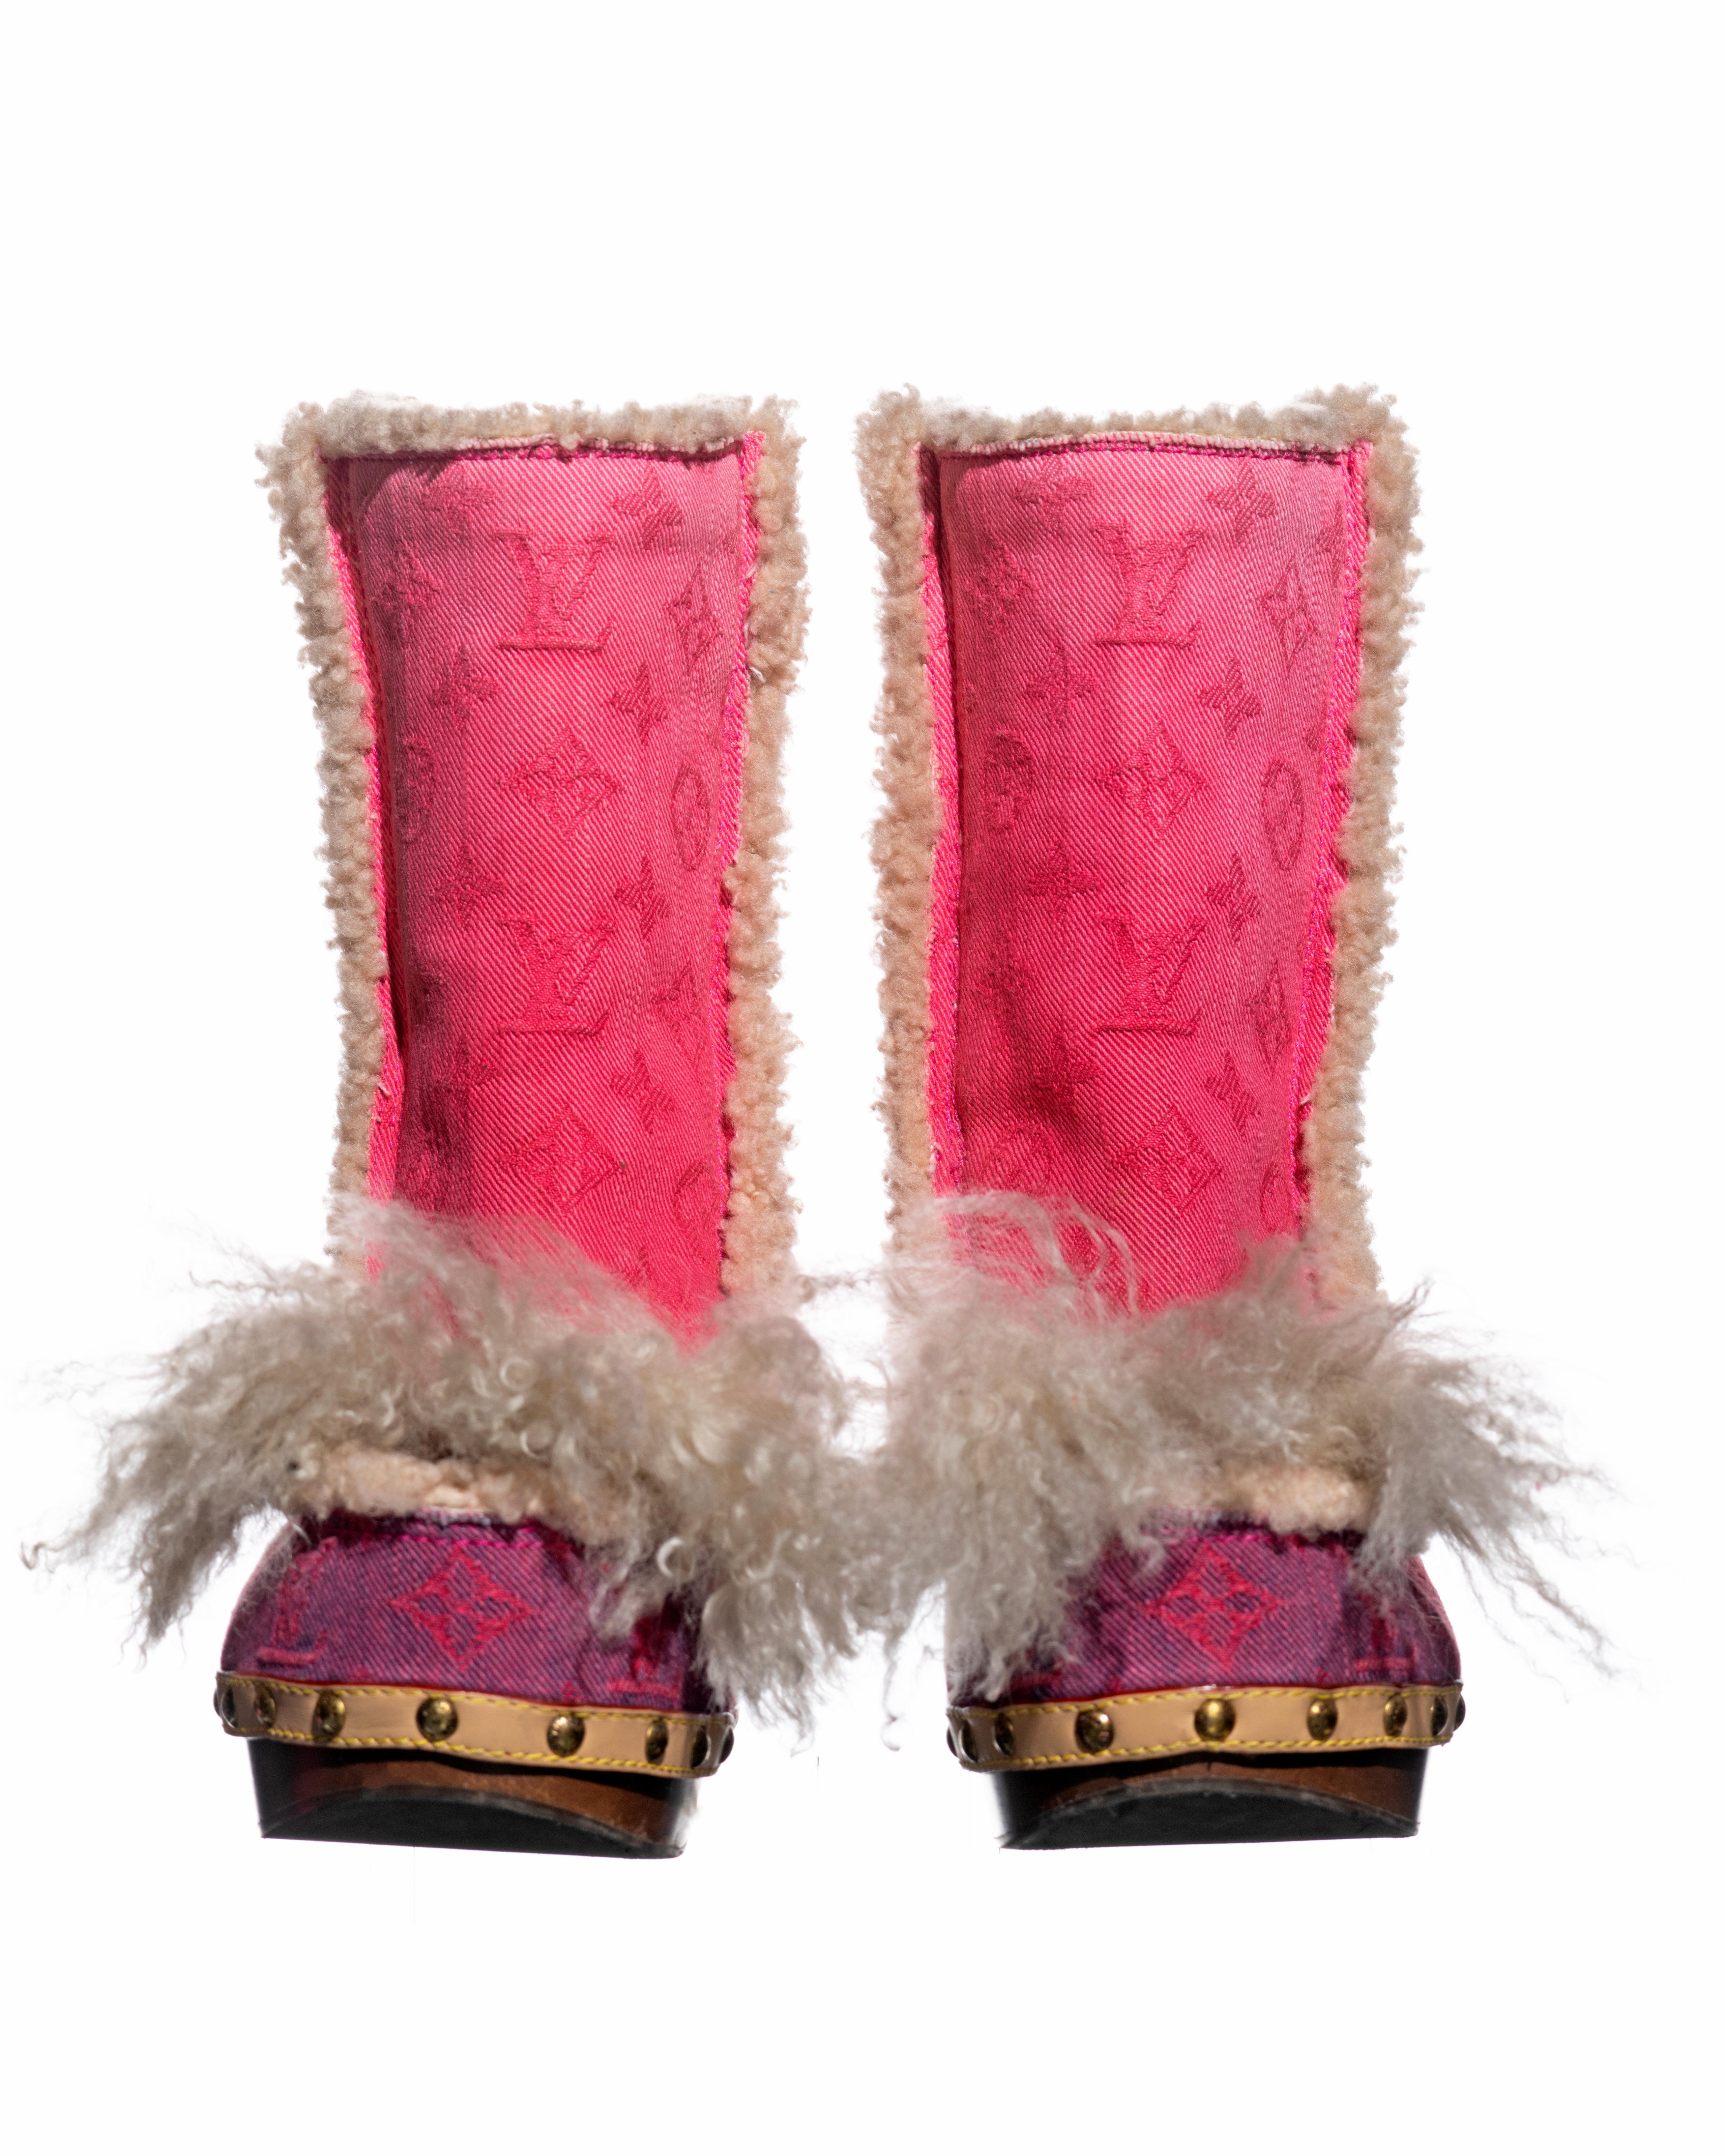 ▪ Rare Louis Vuitton denim clog boots 
▪ Designed by Marc Jacobs 
▪ Ombre pink monogram jacquard denim 
▪ Cream shearling interior and trim 
▪ Wooden clog-style sole with leather trim and gold studs
▪ Mongolian lamb tassels at the toe
▪ Pink metal